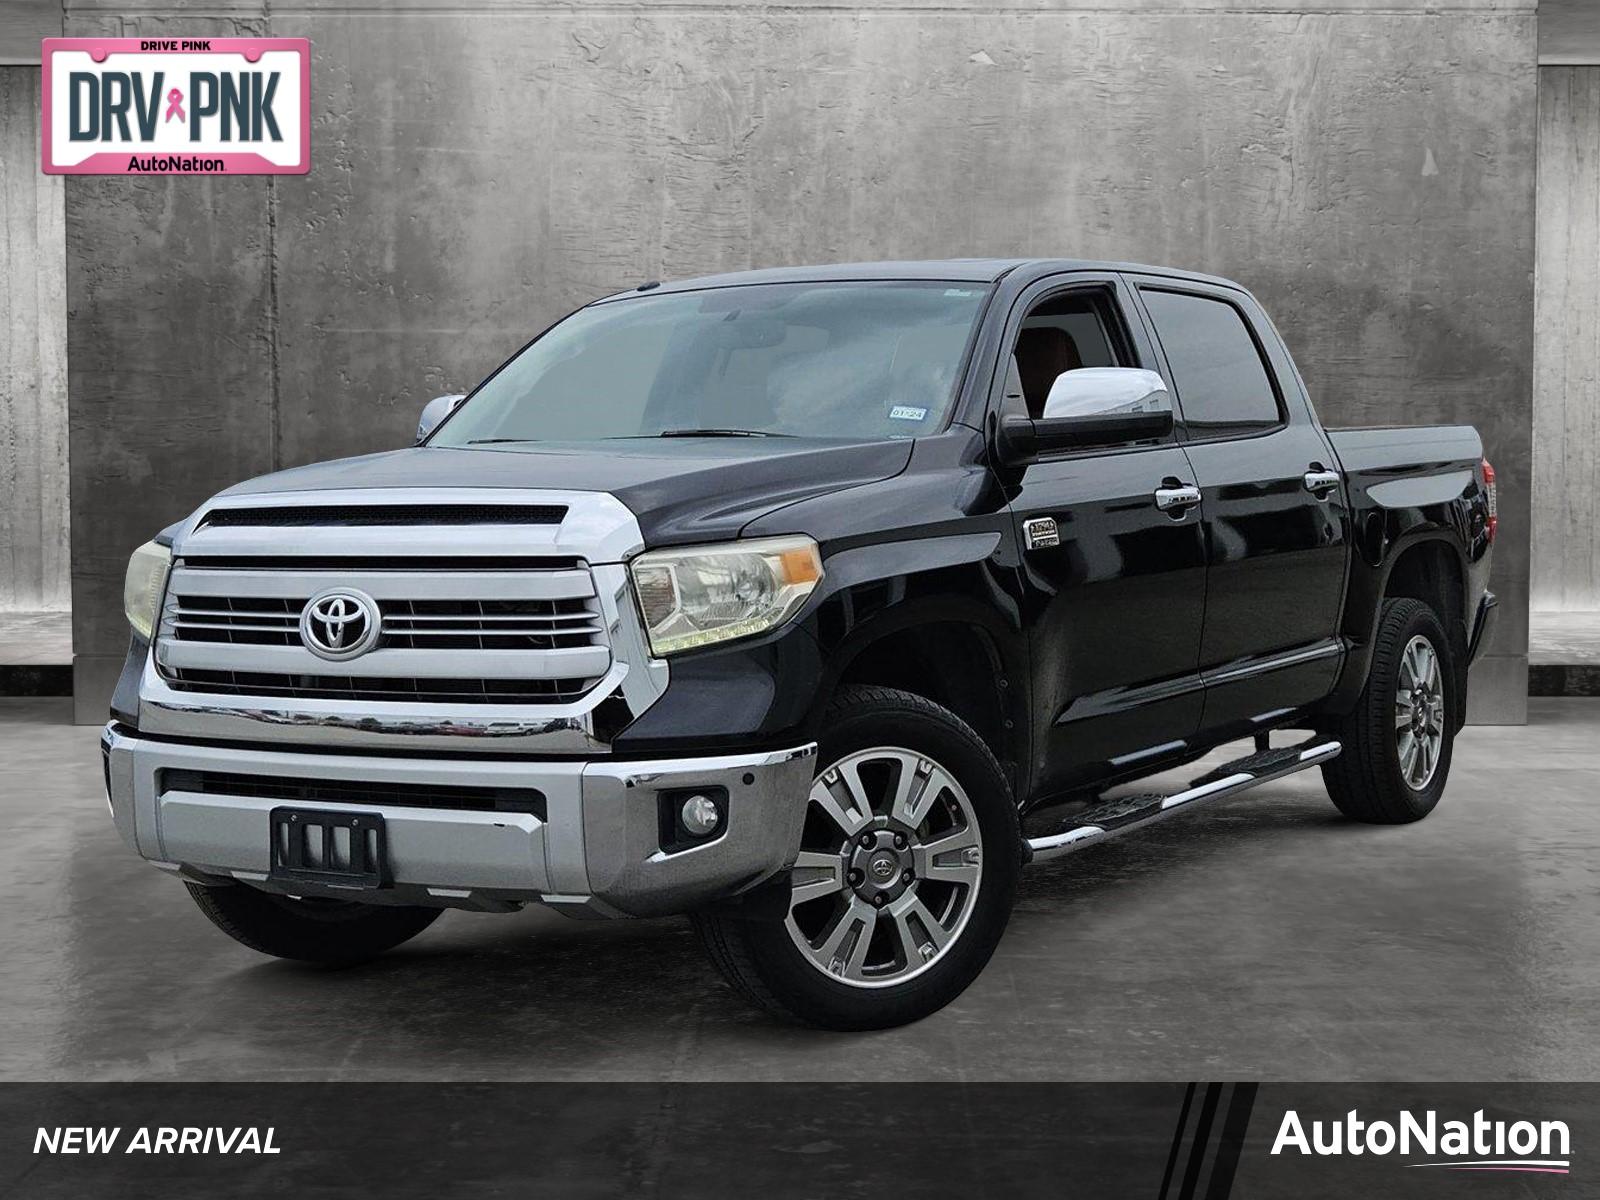 2014 Toyota Tundra 2WD Truck Vehicle Photo in NORTH RICHLAND HILLS, TX 76180-7199